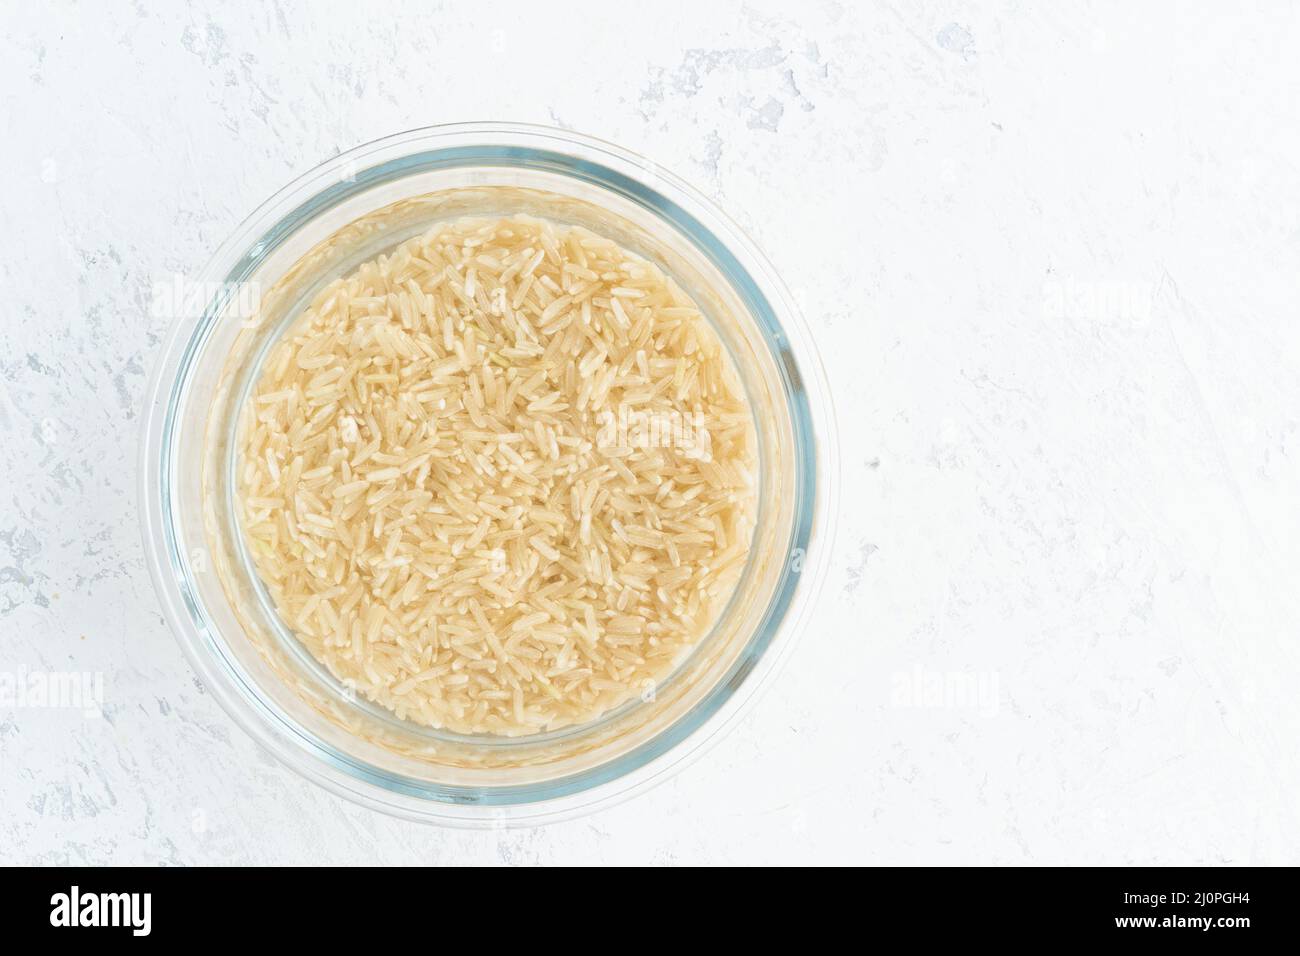 Soaking brown rice cereal in water to ferment cereals and neutralize phytic acid. Stock Photo